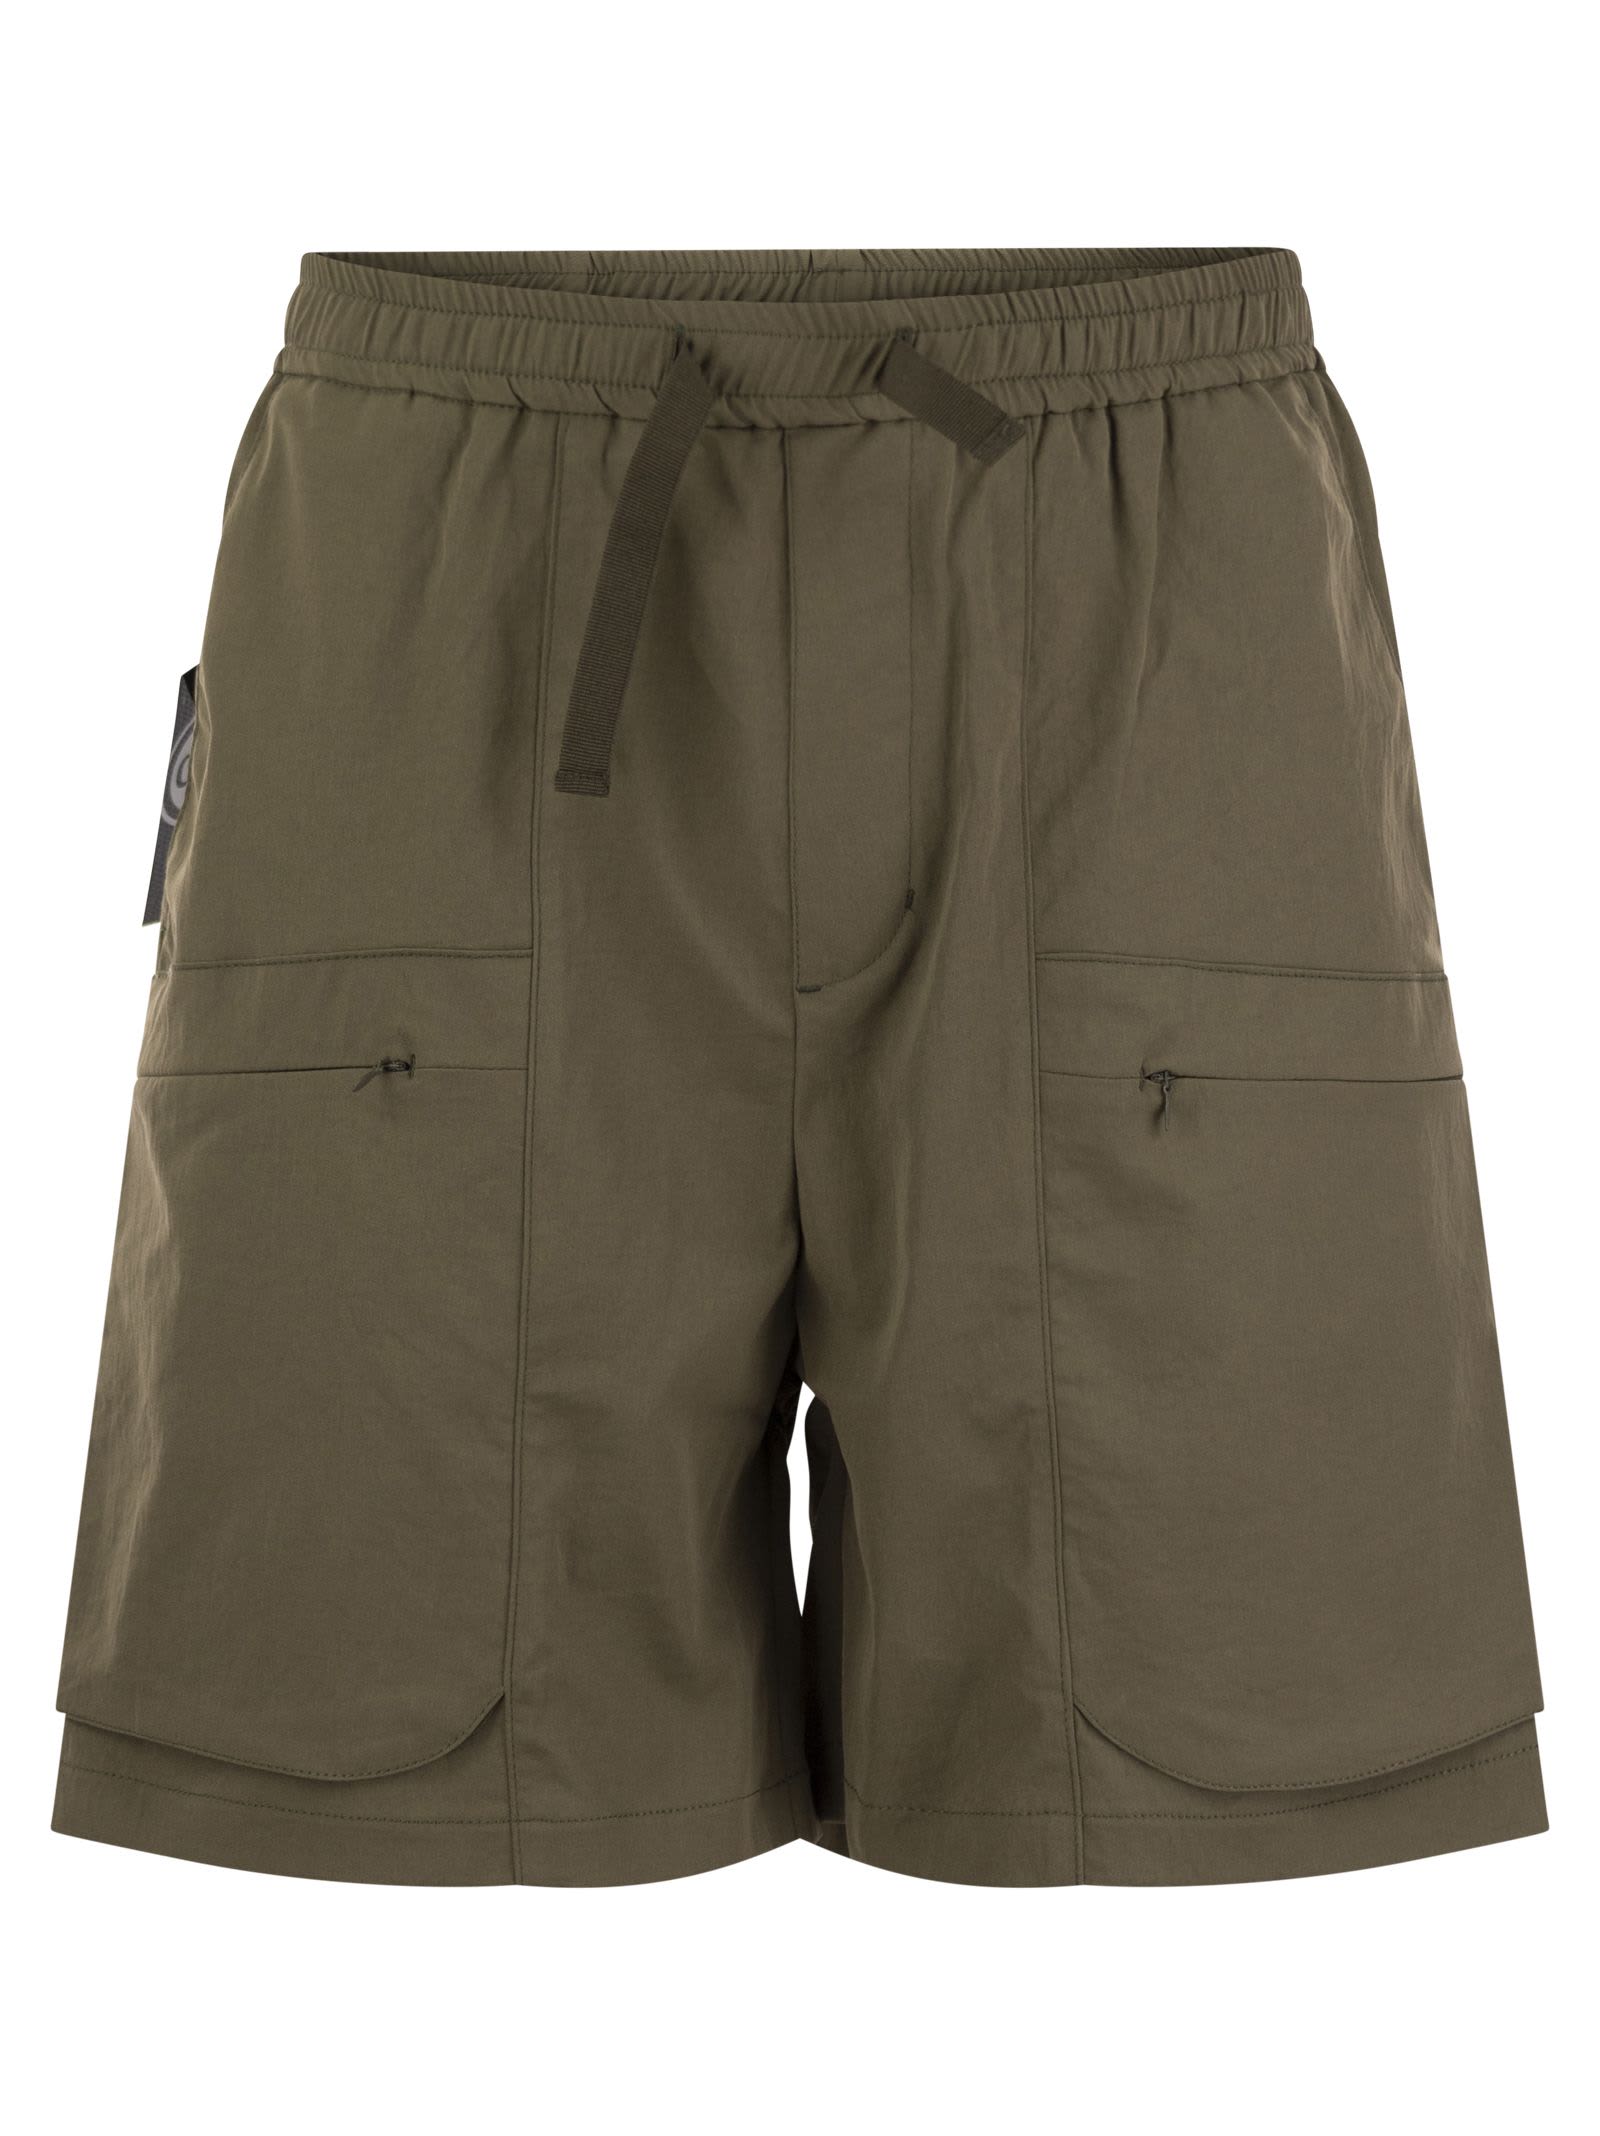 Bermuda Shorts In Technical Fabric With Drawstring